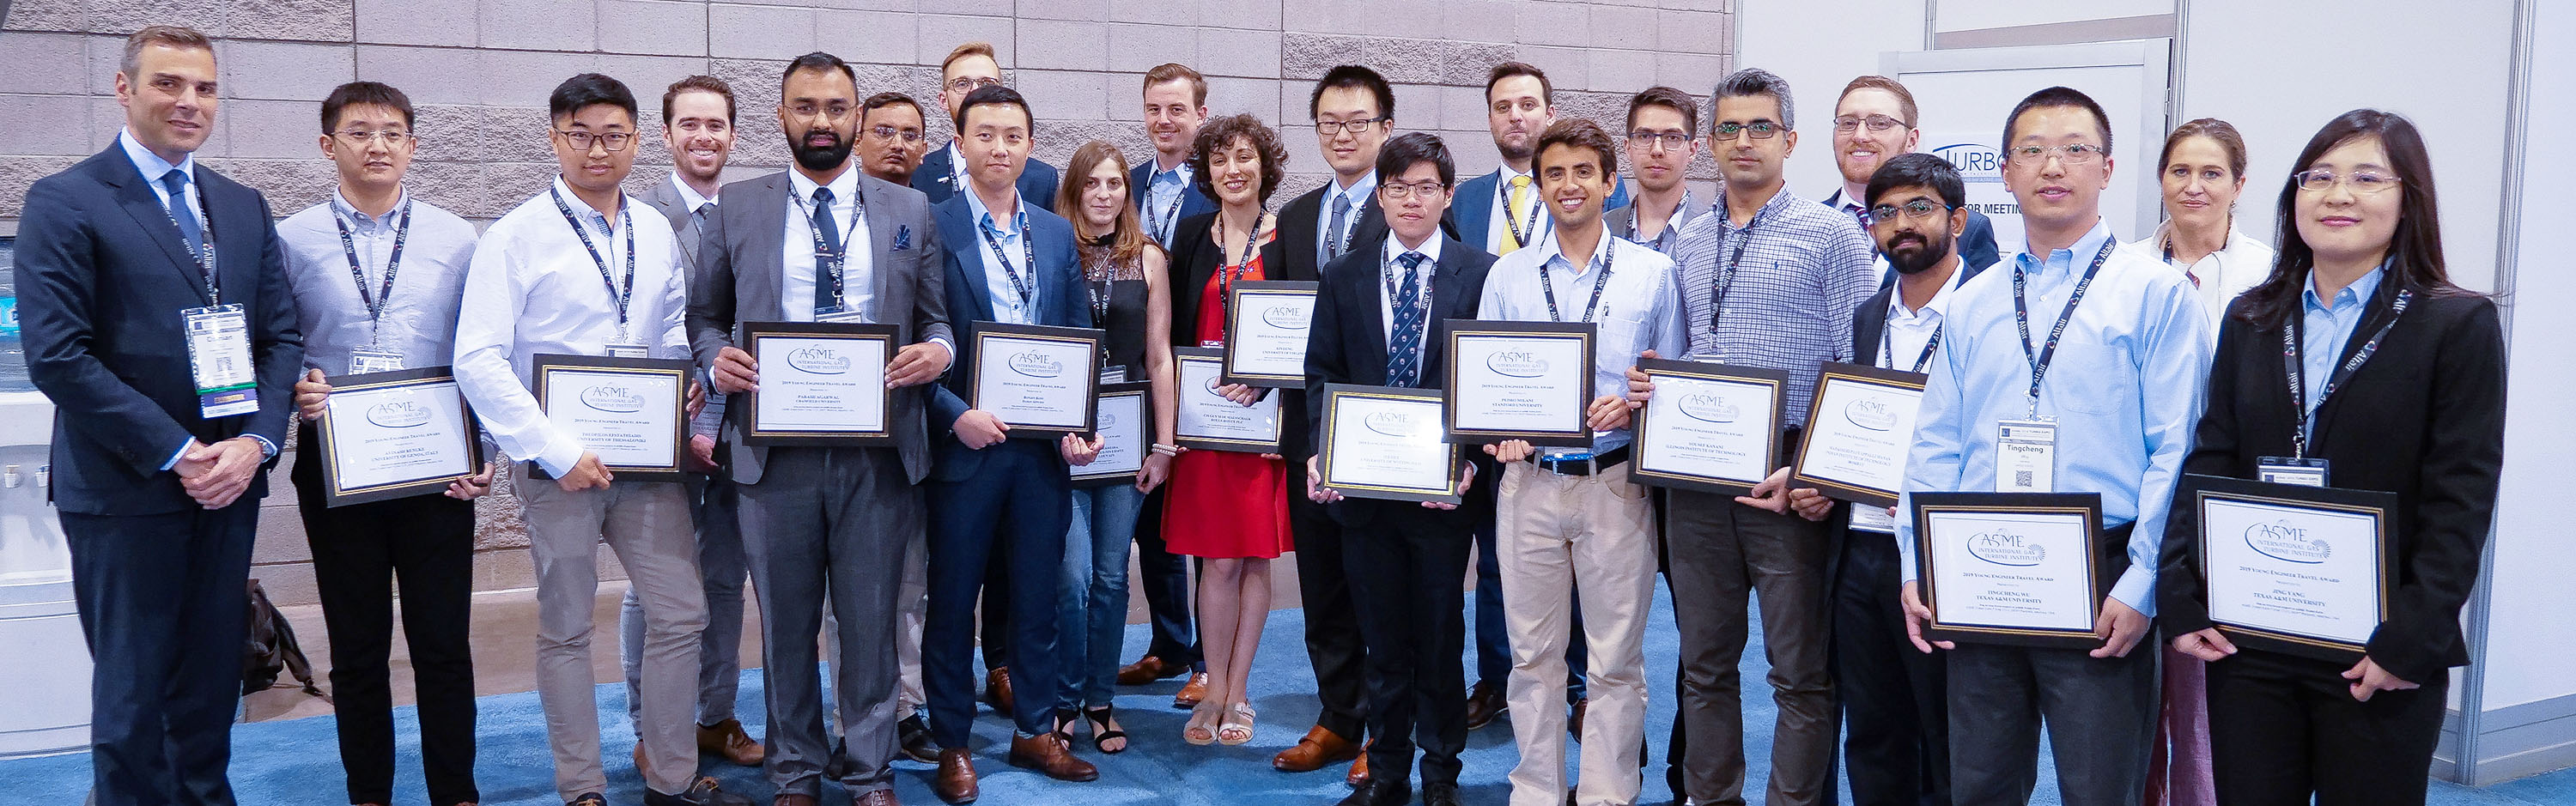 Turbo Expo Young Engineer Award group picture